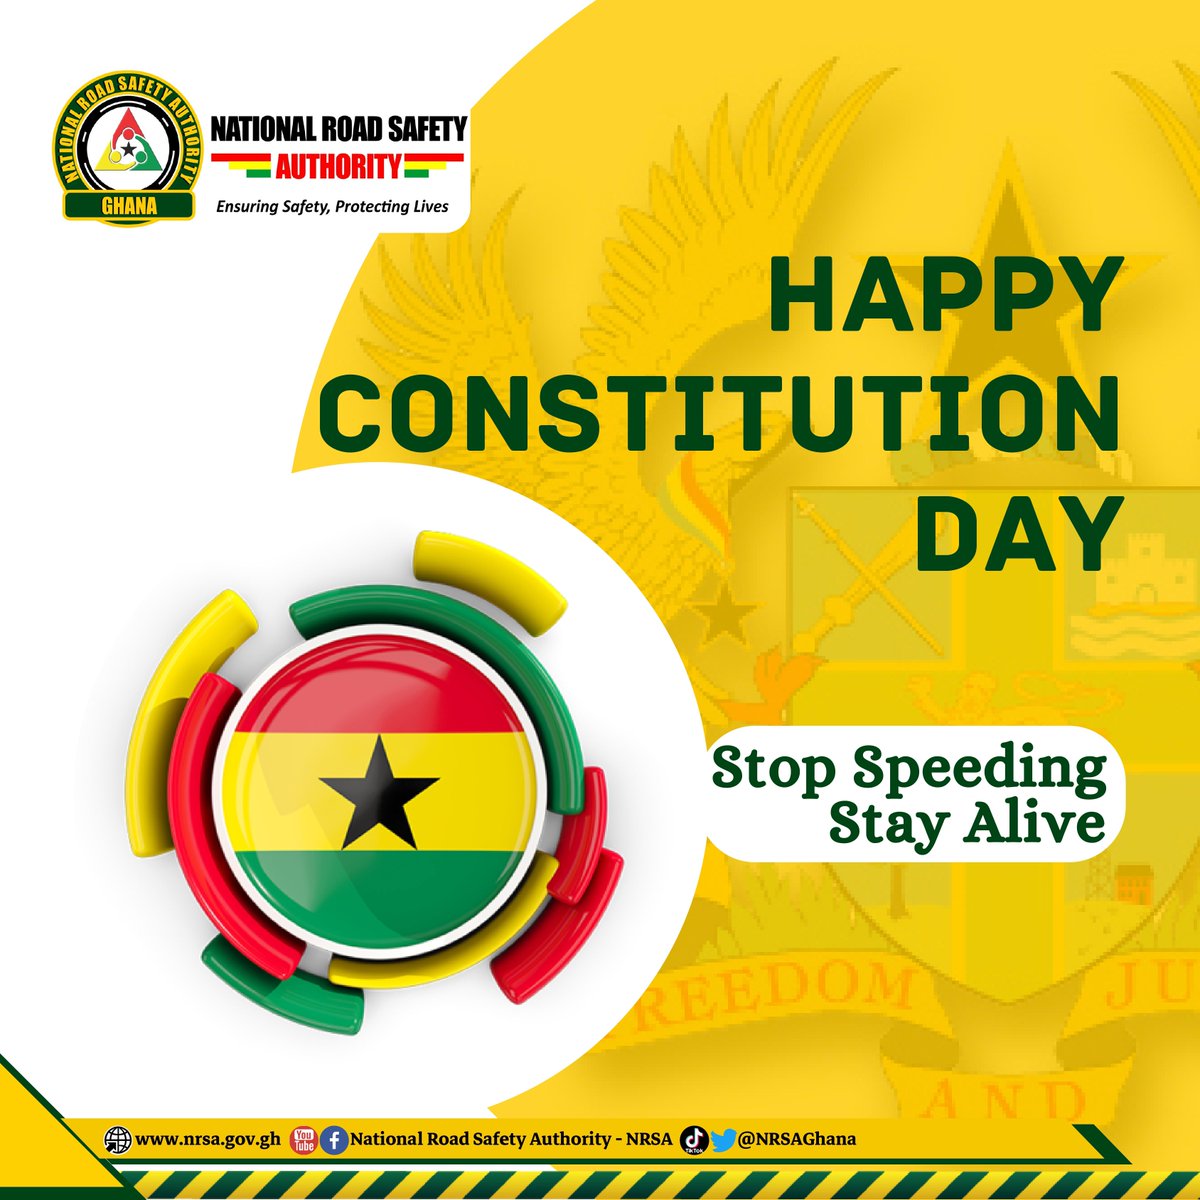 Happy Constitution Day! Long live Ghana! #ConstitutionDay #RoadSafety #StopSpeeding #StayAlive #EnsuringSafetyProtectingLives